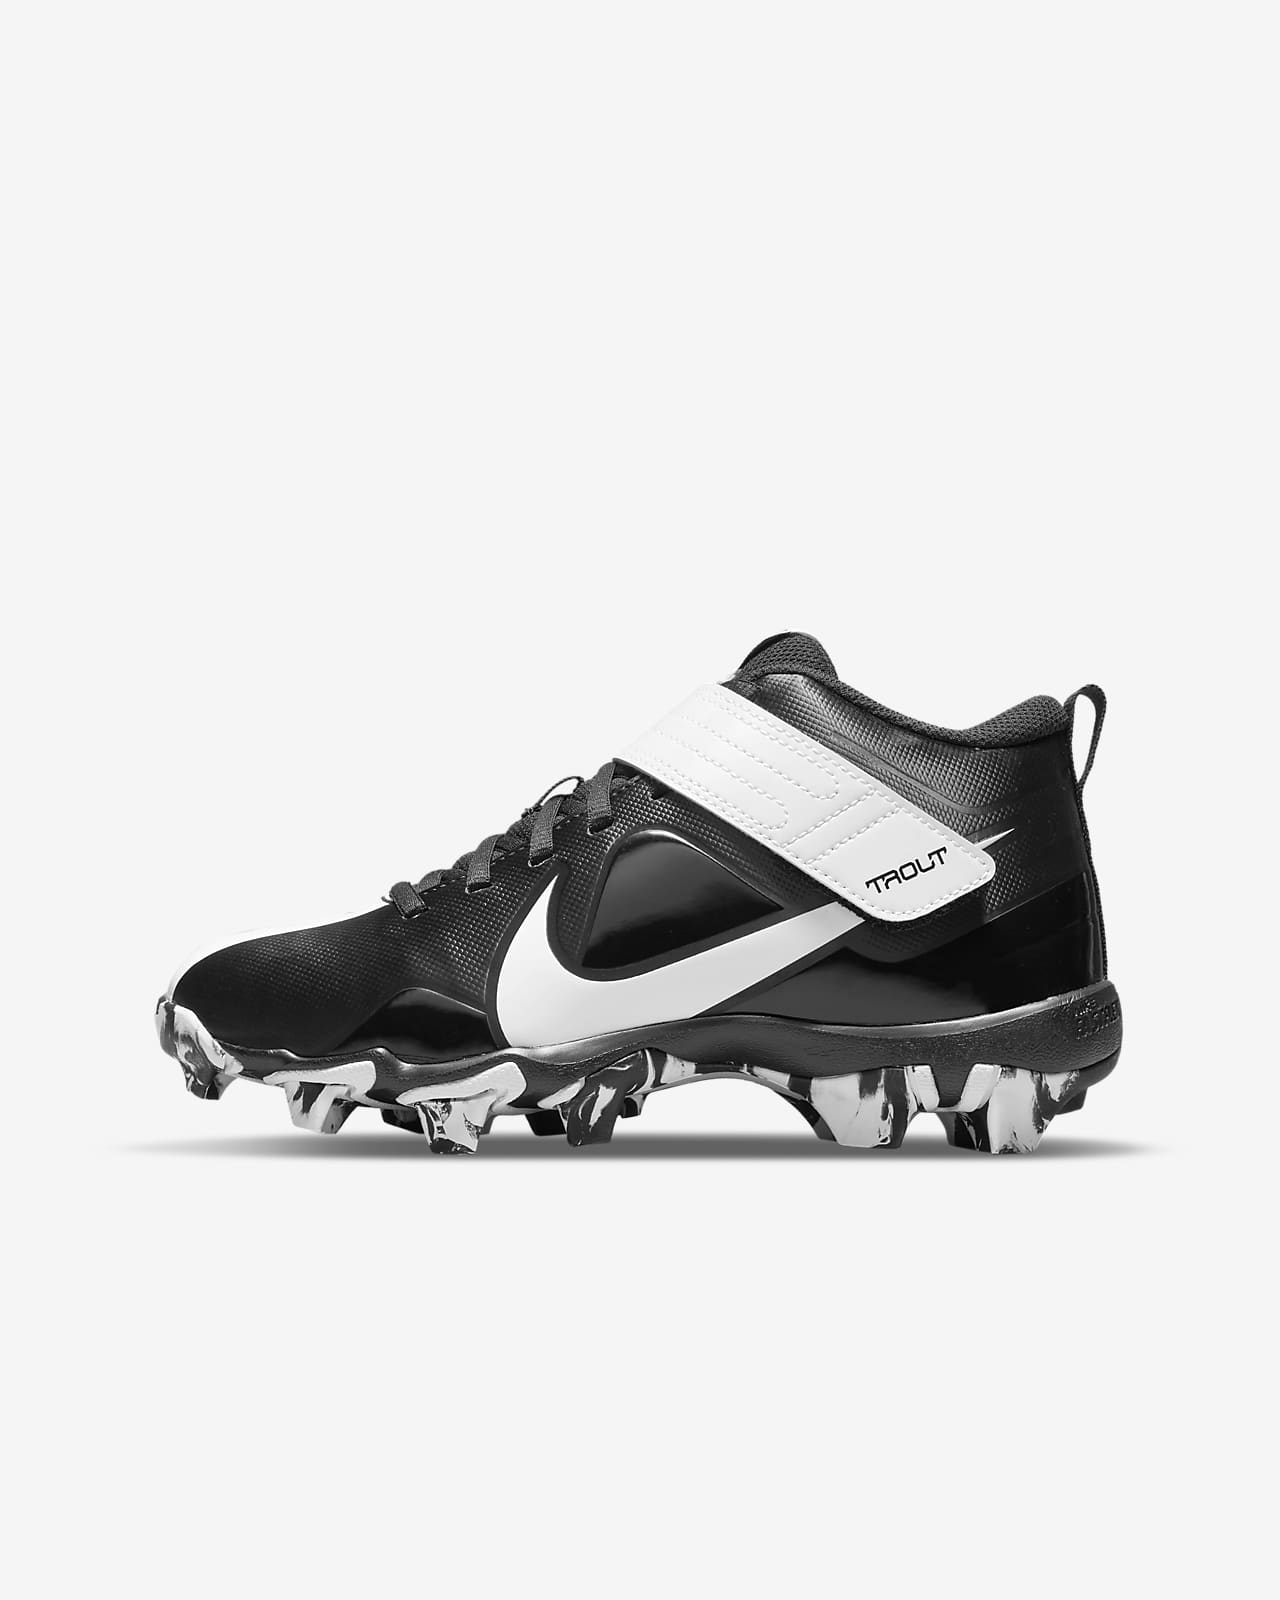 Mike Trout Baseball Cleats Youth Sale Online, SAVE 41% 